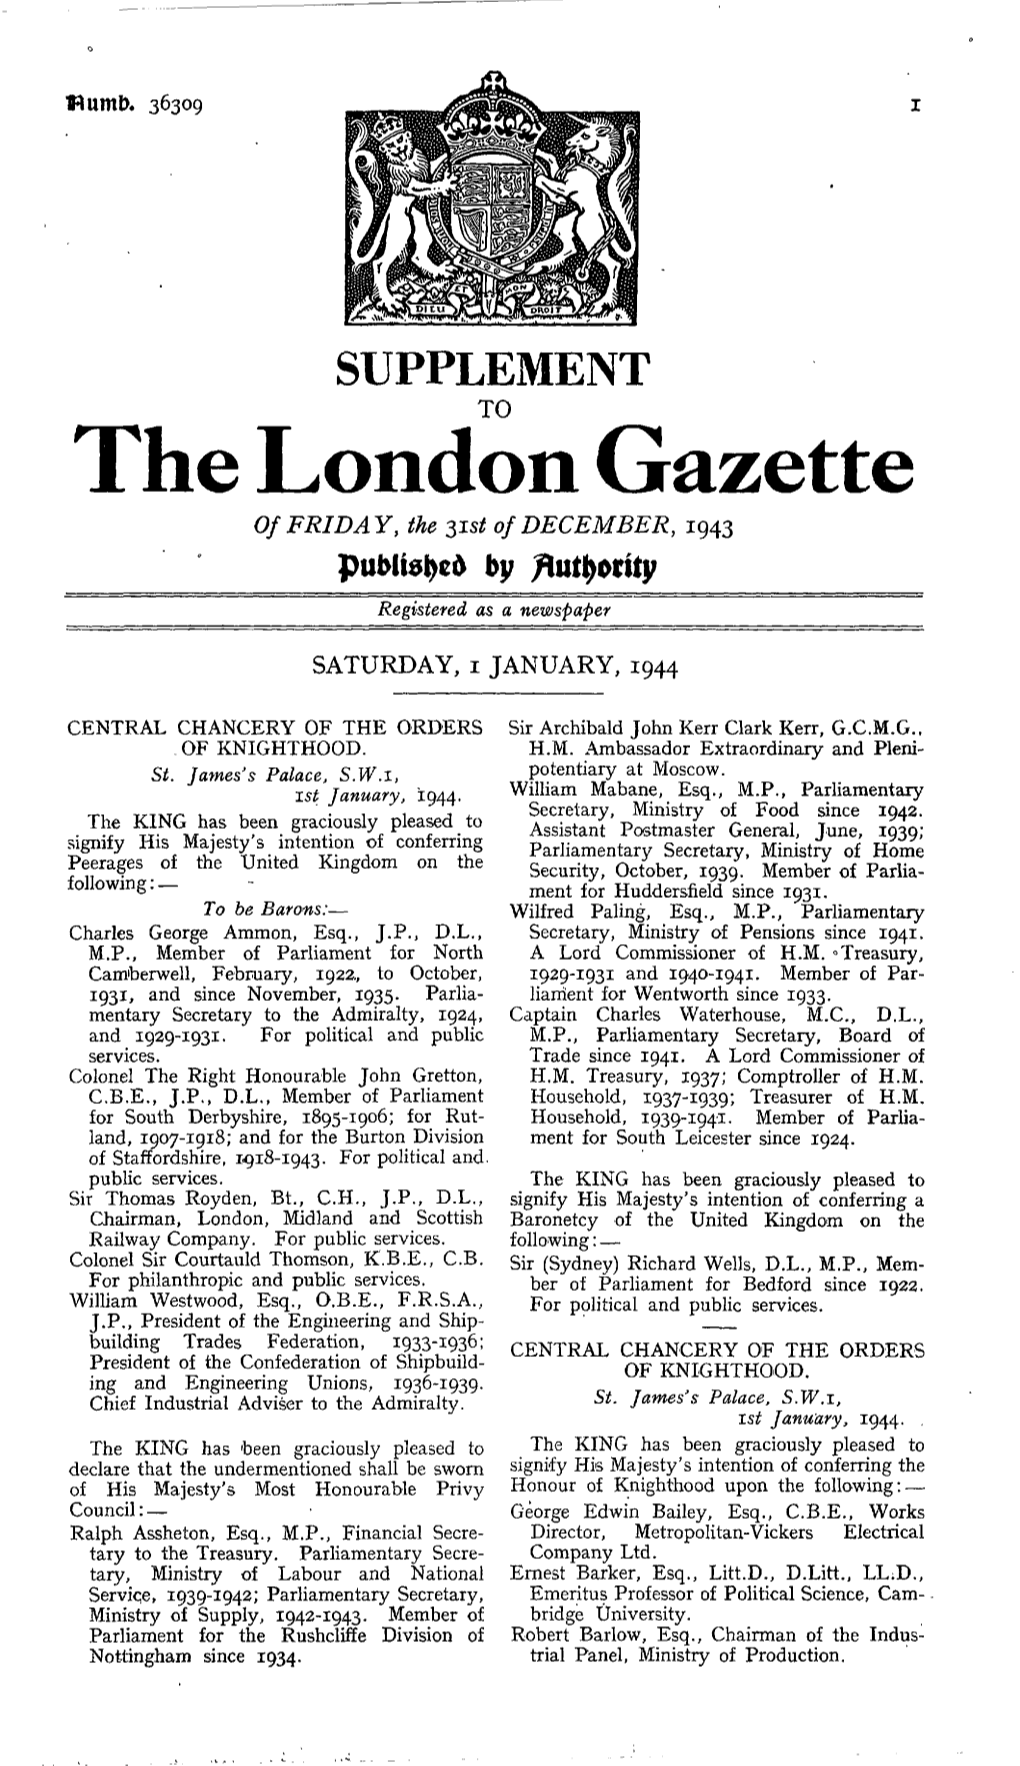 The London Gazette of FRIDAY, the 31$* of DECEMBER, 1943 Published by /Lutyority Registered As a Newspaper